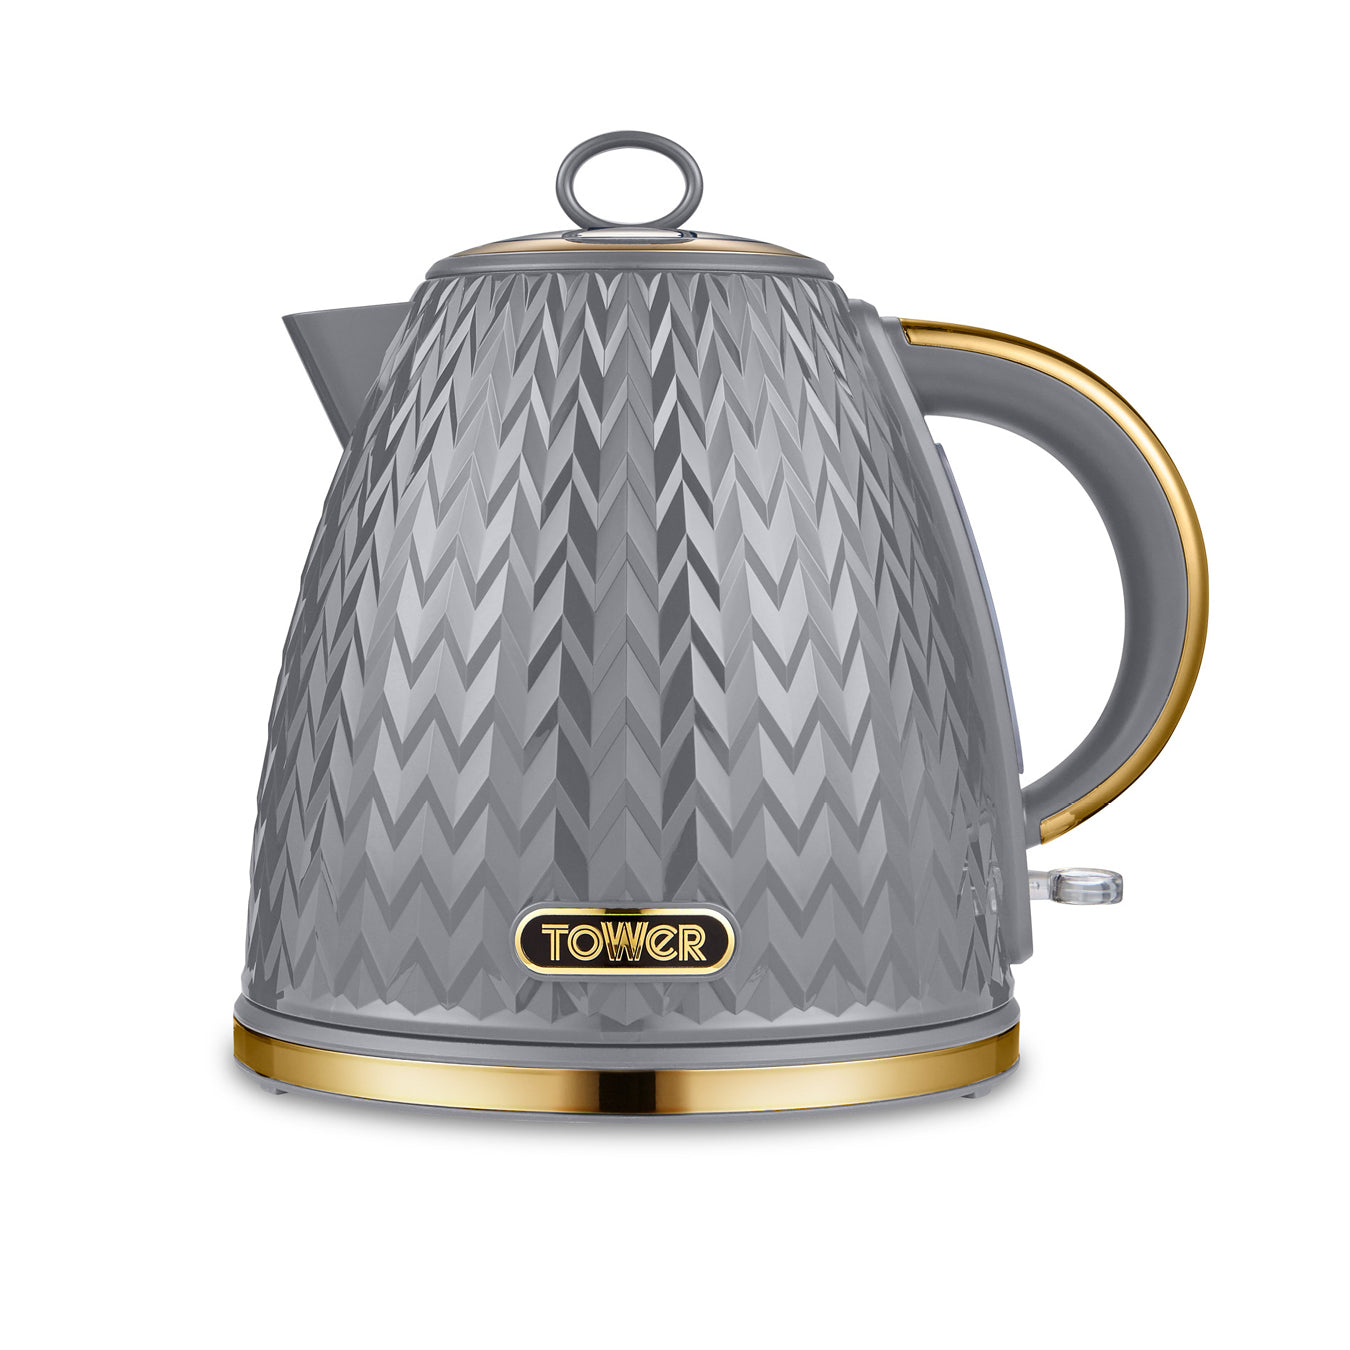 Tower Empire 3KW 1.7 Litre Pyramid Kettle - Grey